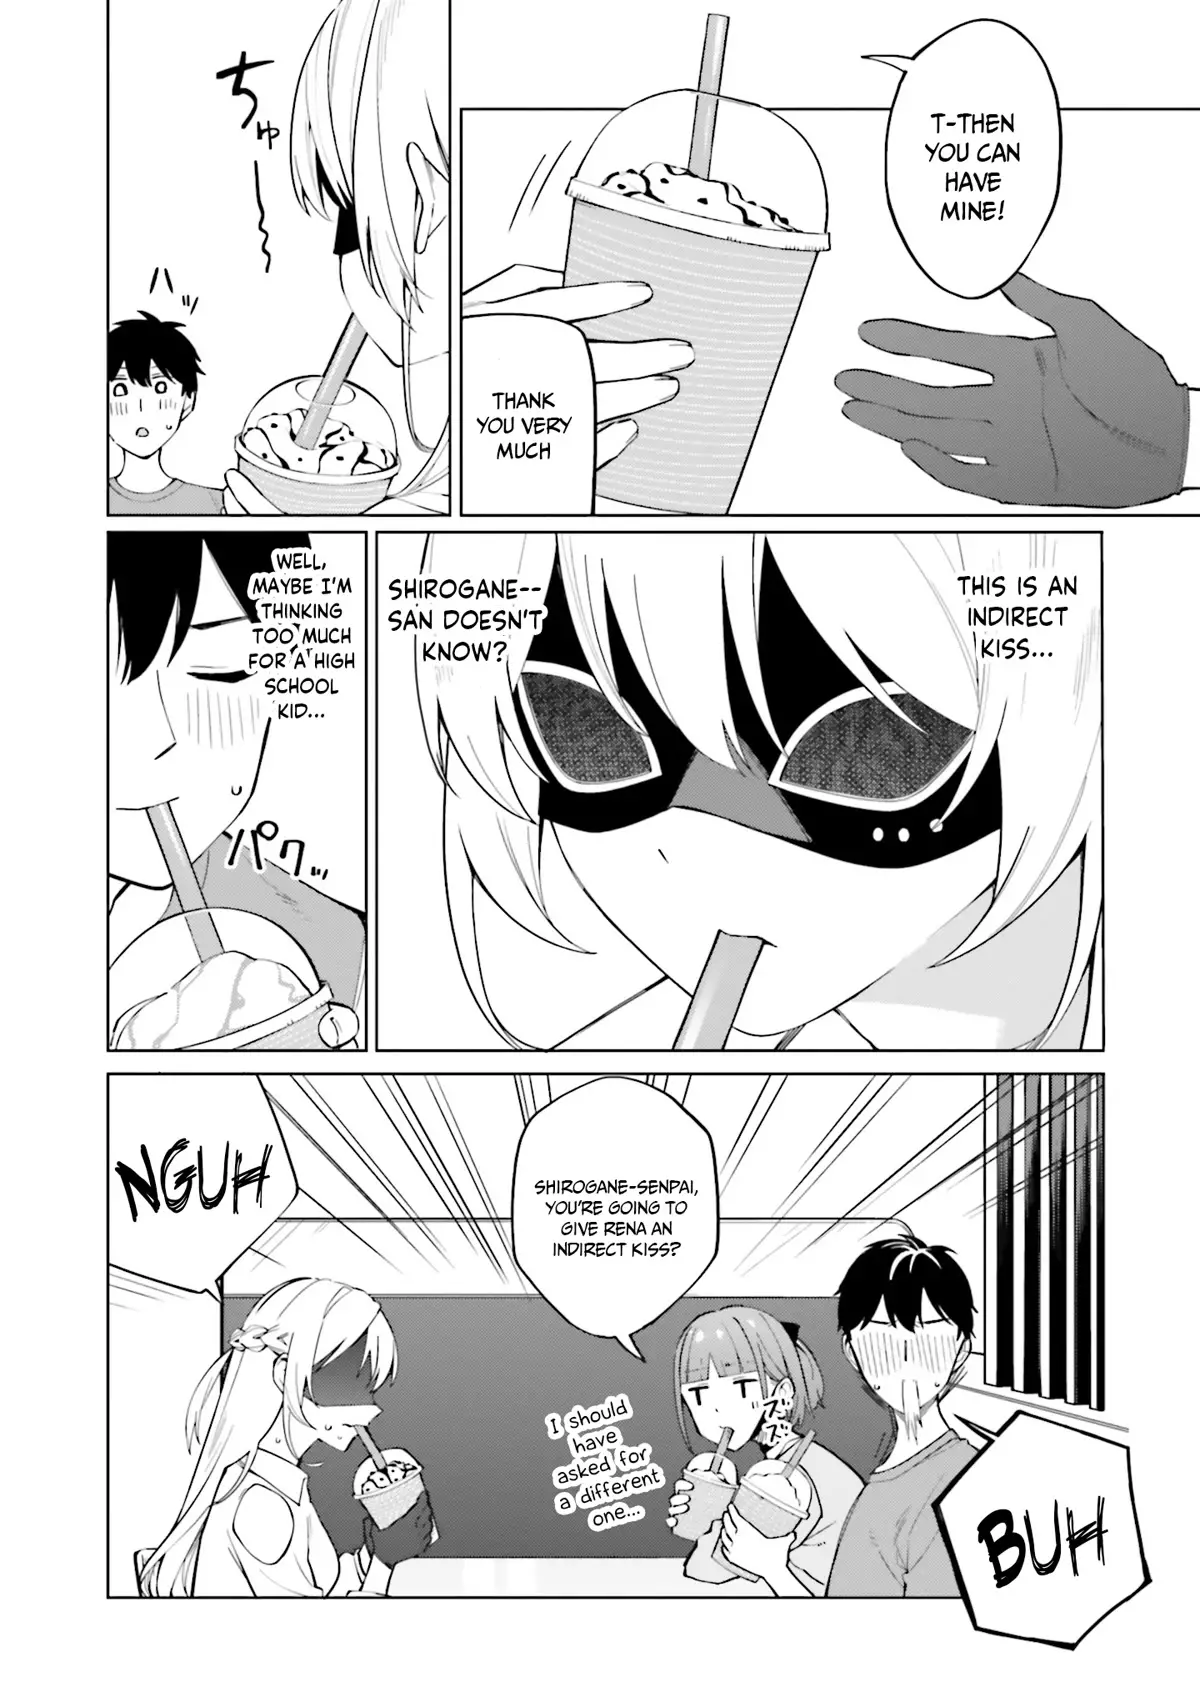 I Don't Understand Shirogane-San's Facial Expression At All - 11 page 25-8ca3256c